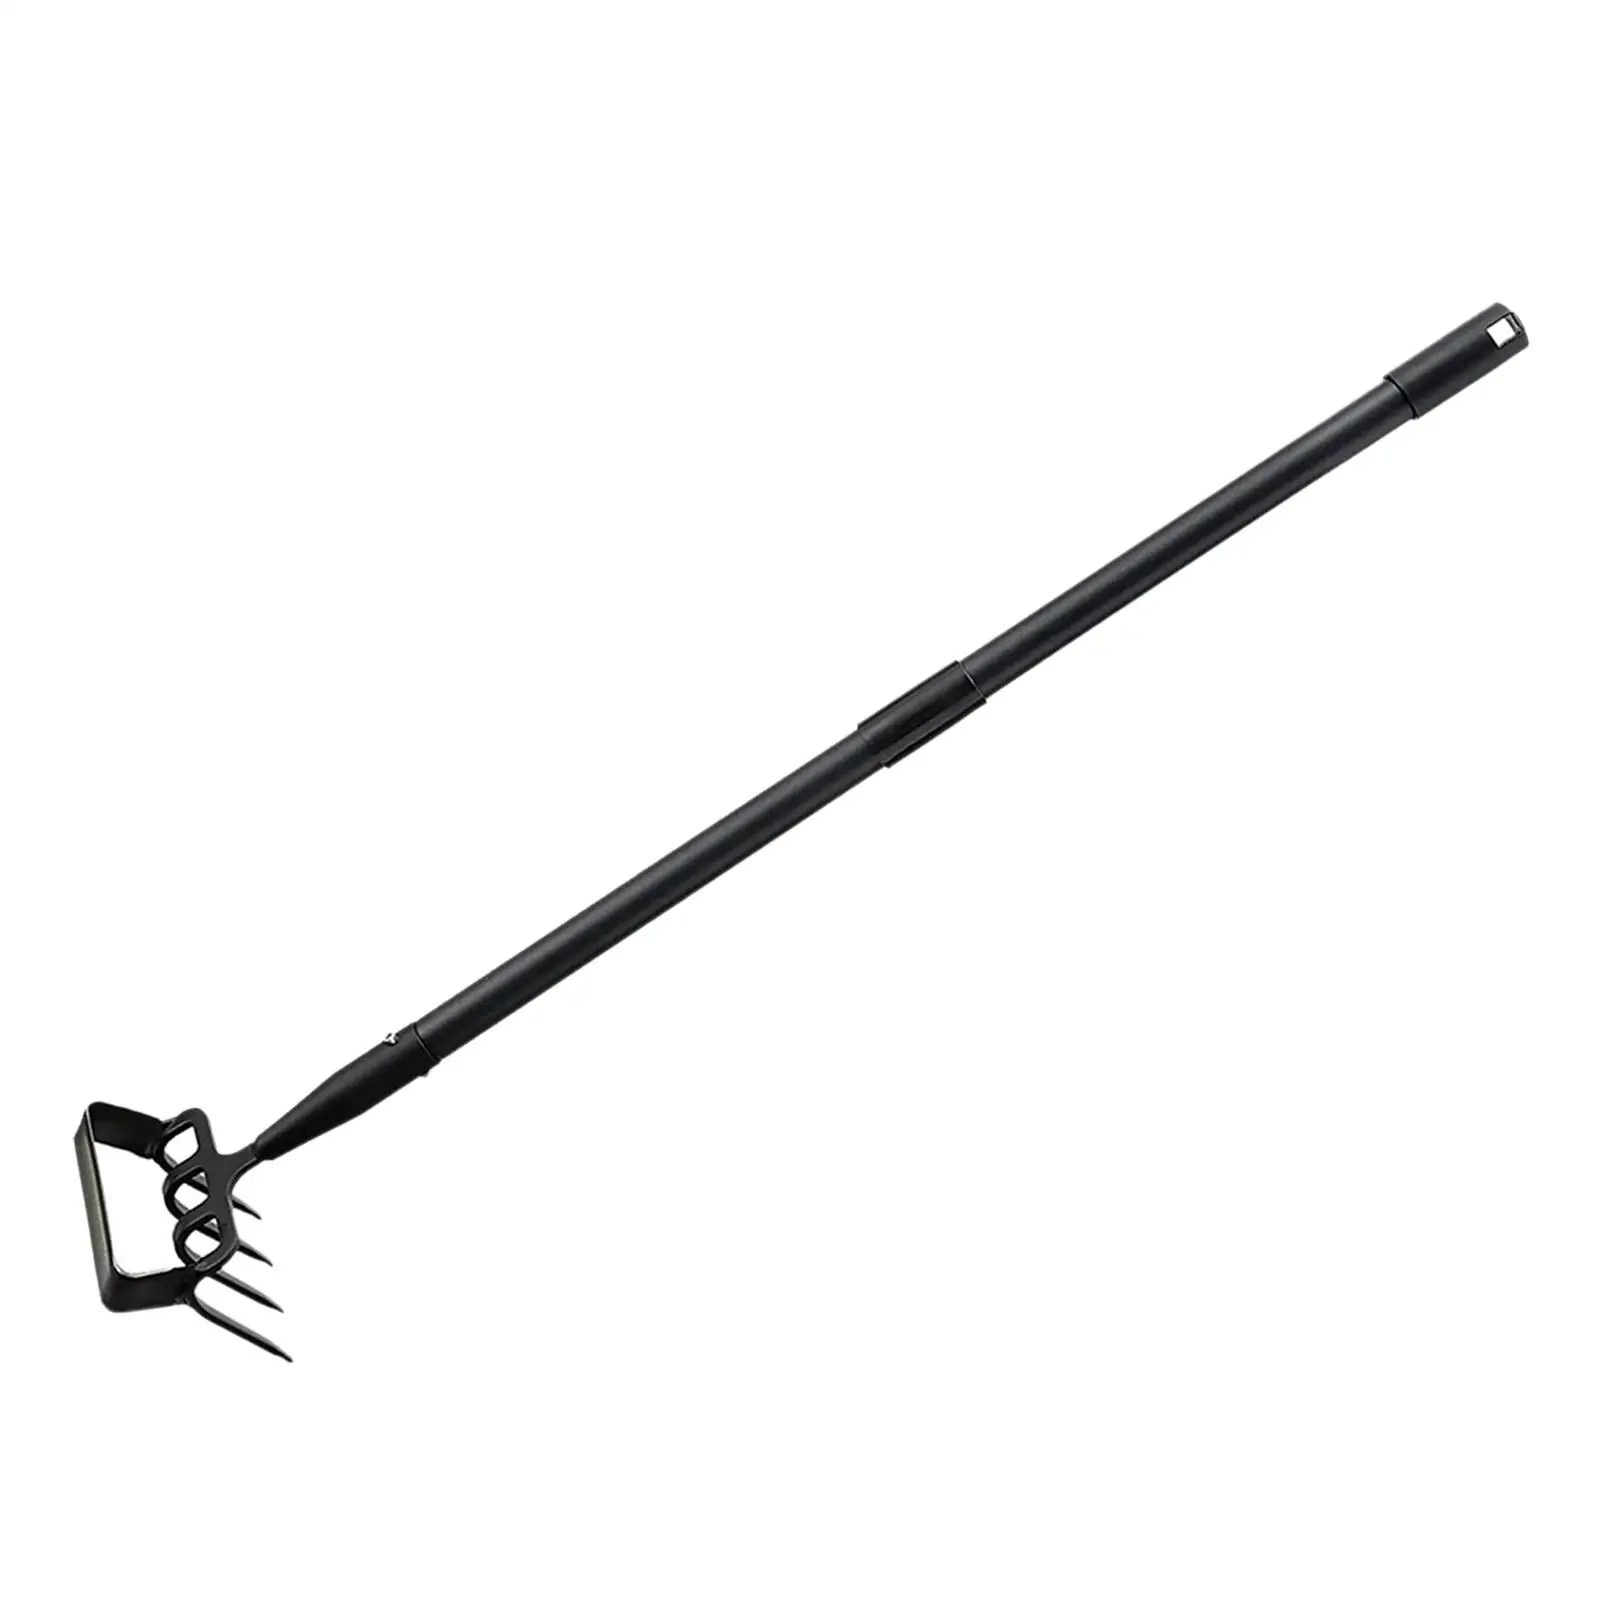 Garden Weeder Hand Tool Dual Purpose Stirrup Hoe and Cultivator Scuffle Loop for Vegetable Planting weeding Men